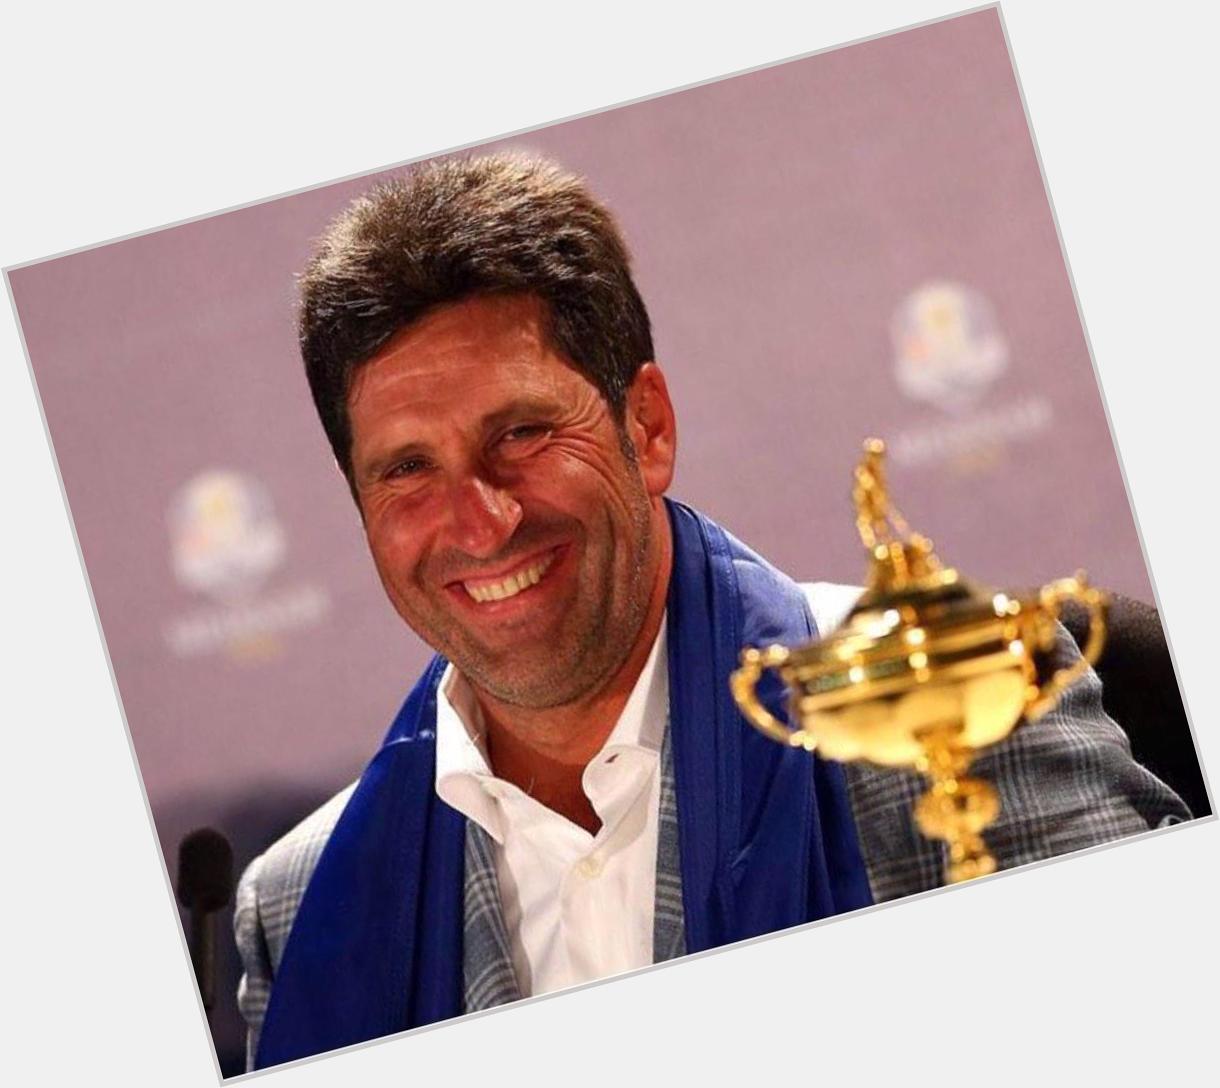 Happy 49th birthday to José María Olazábal, 2-time Masters Champion (\94 & \99) & successful 2012 Ryder Cup captain. 